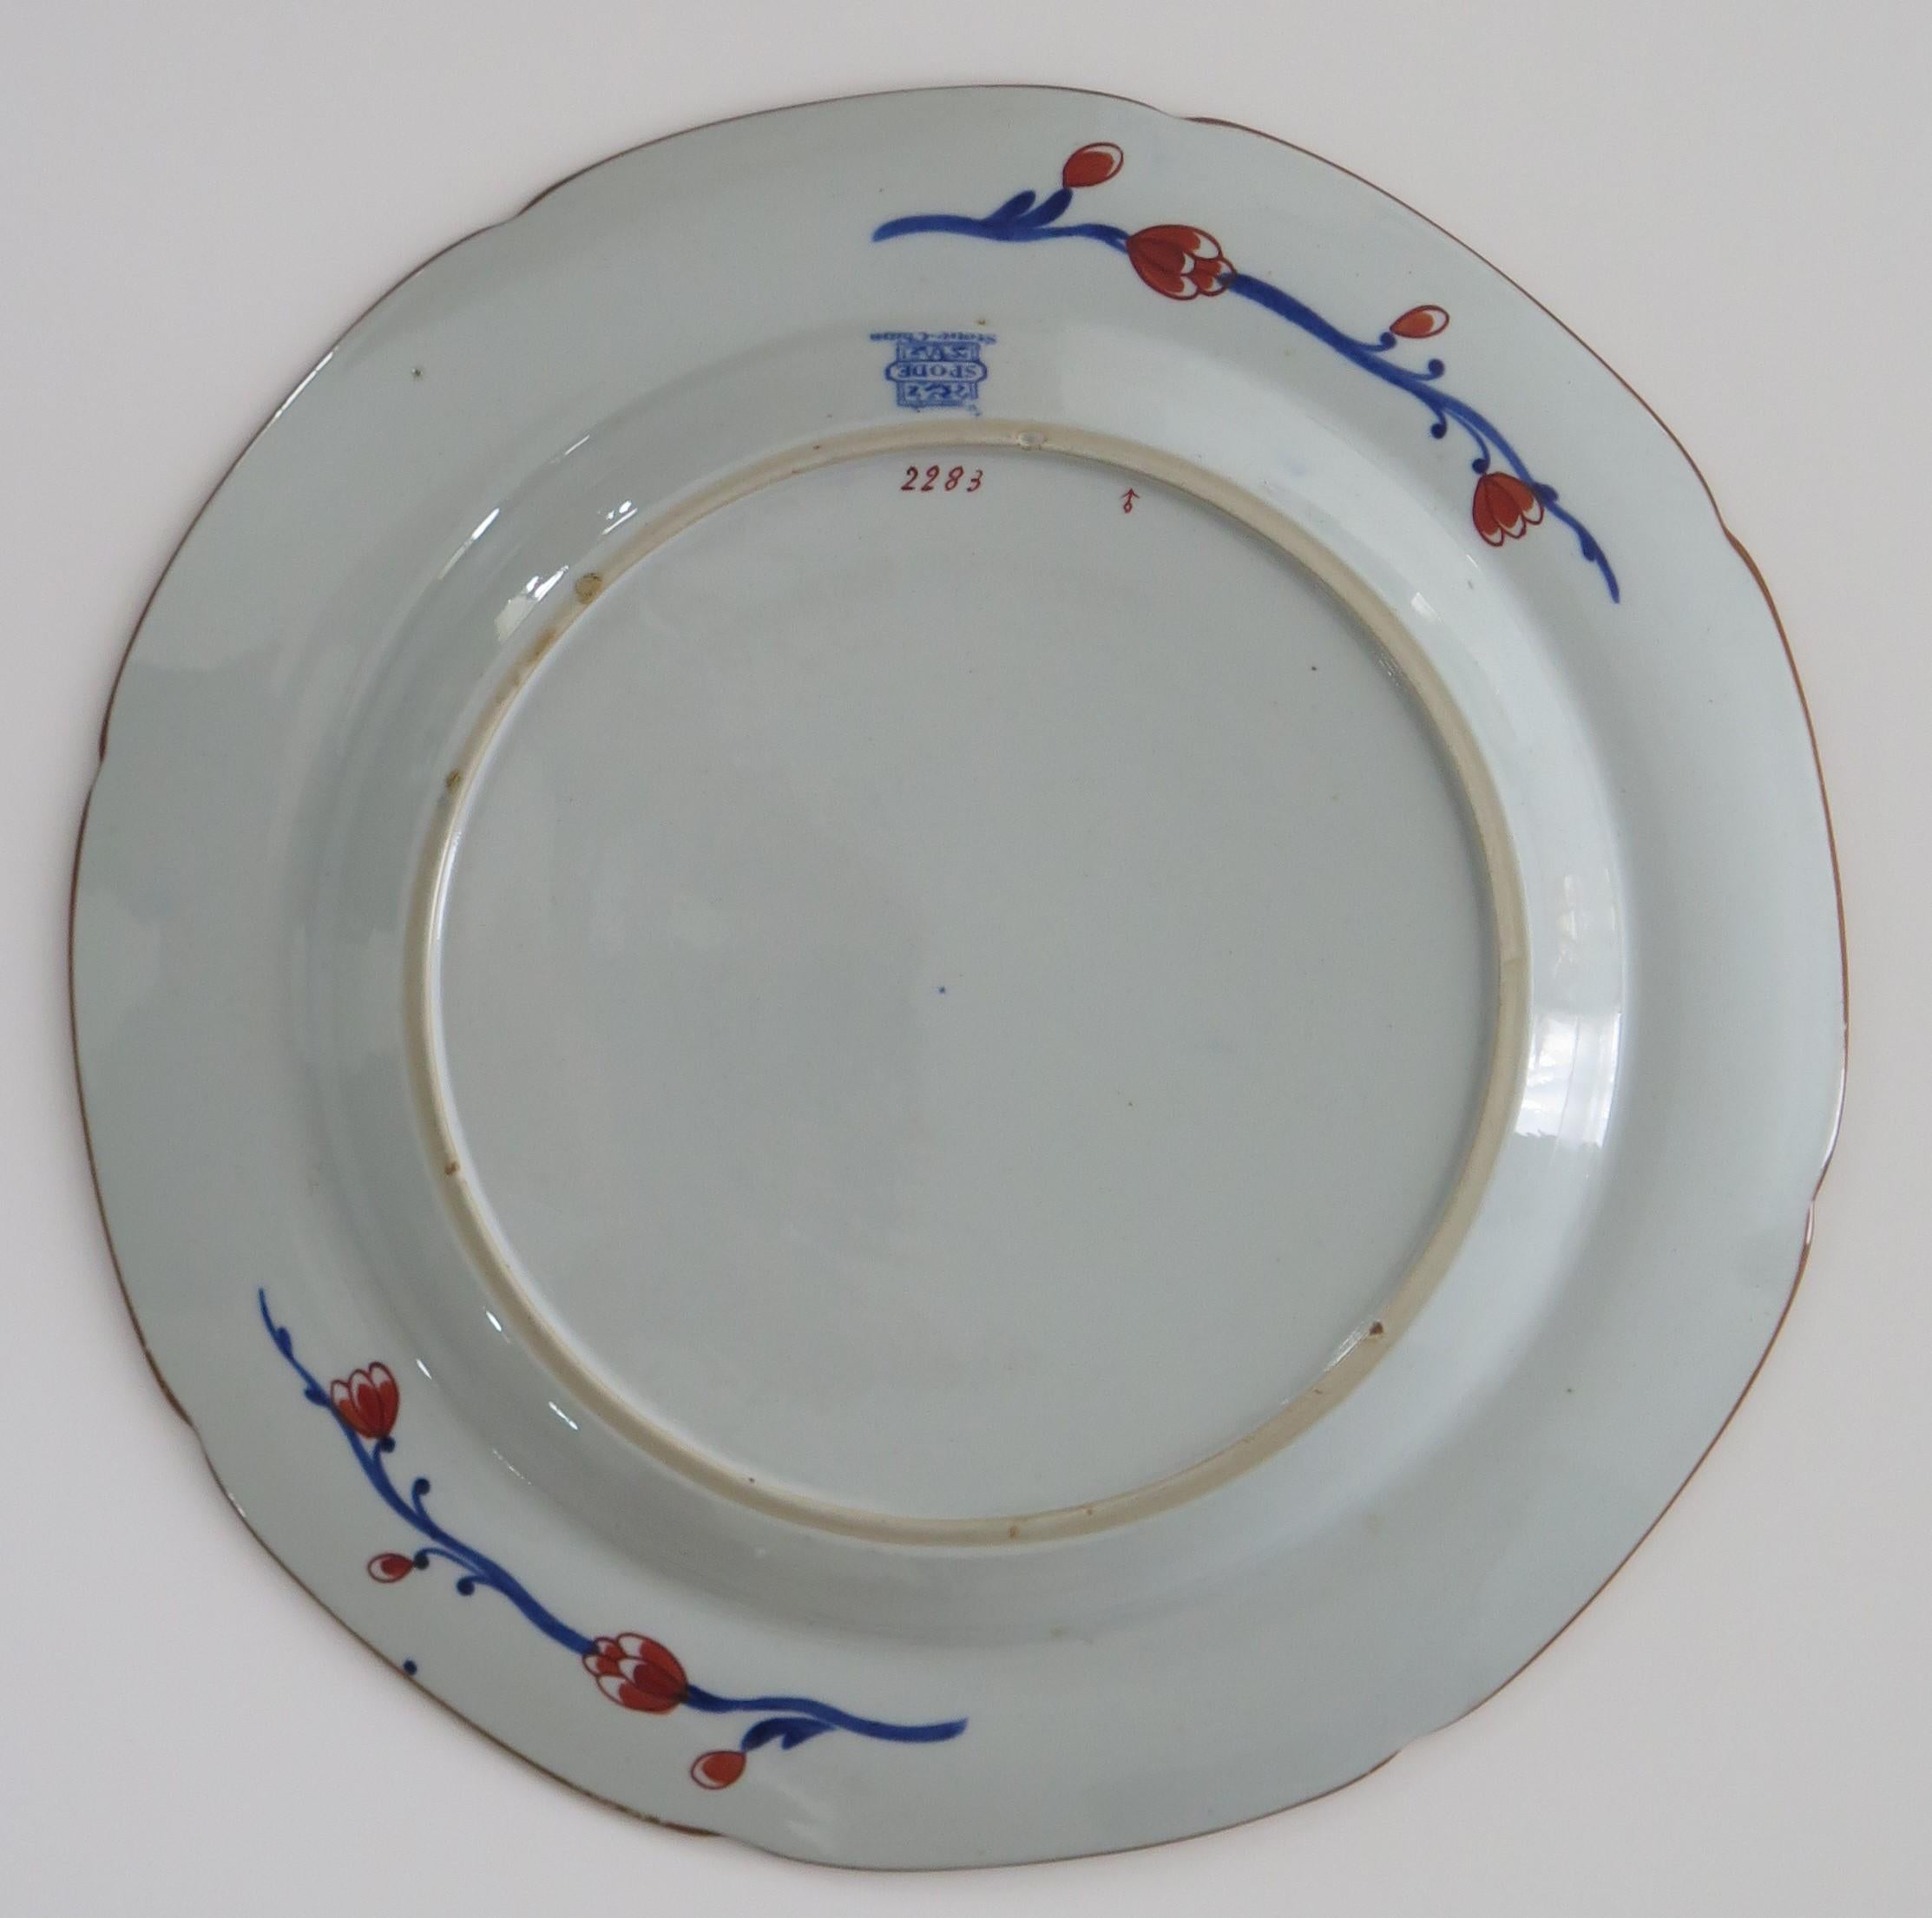 Georgian Spode Dinner Plate a Ironstone Chinoiserie Pattern No.2283, circa 1820 For Sale 3